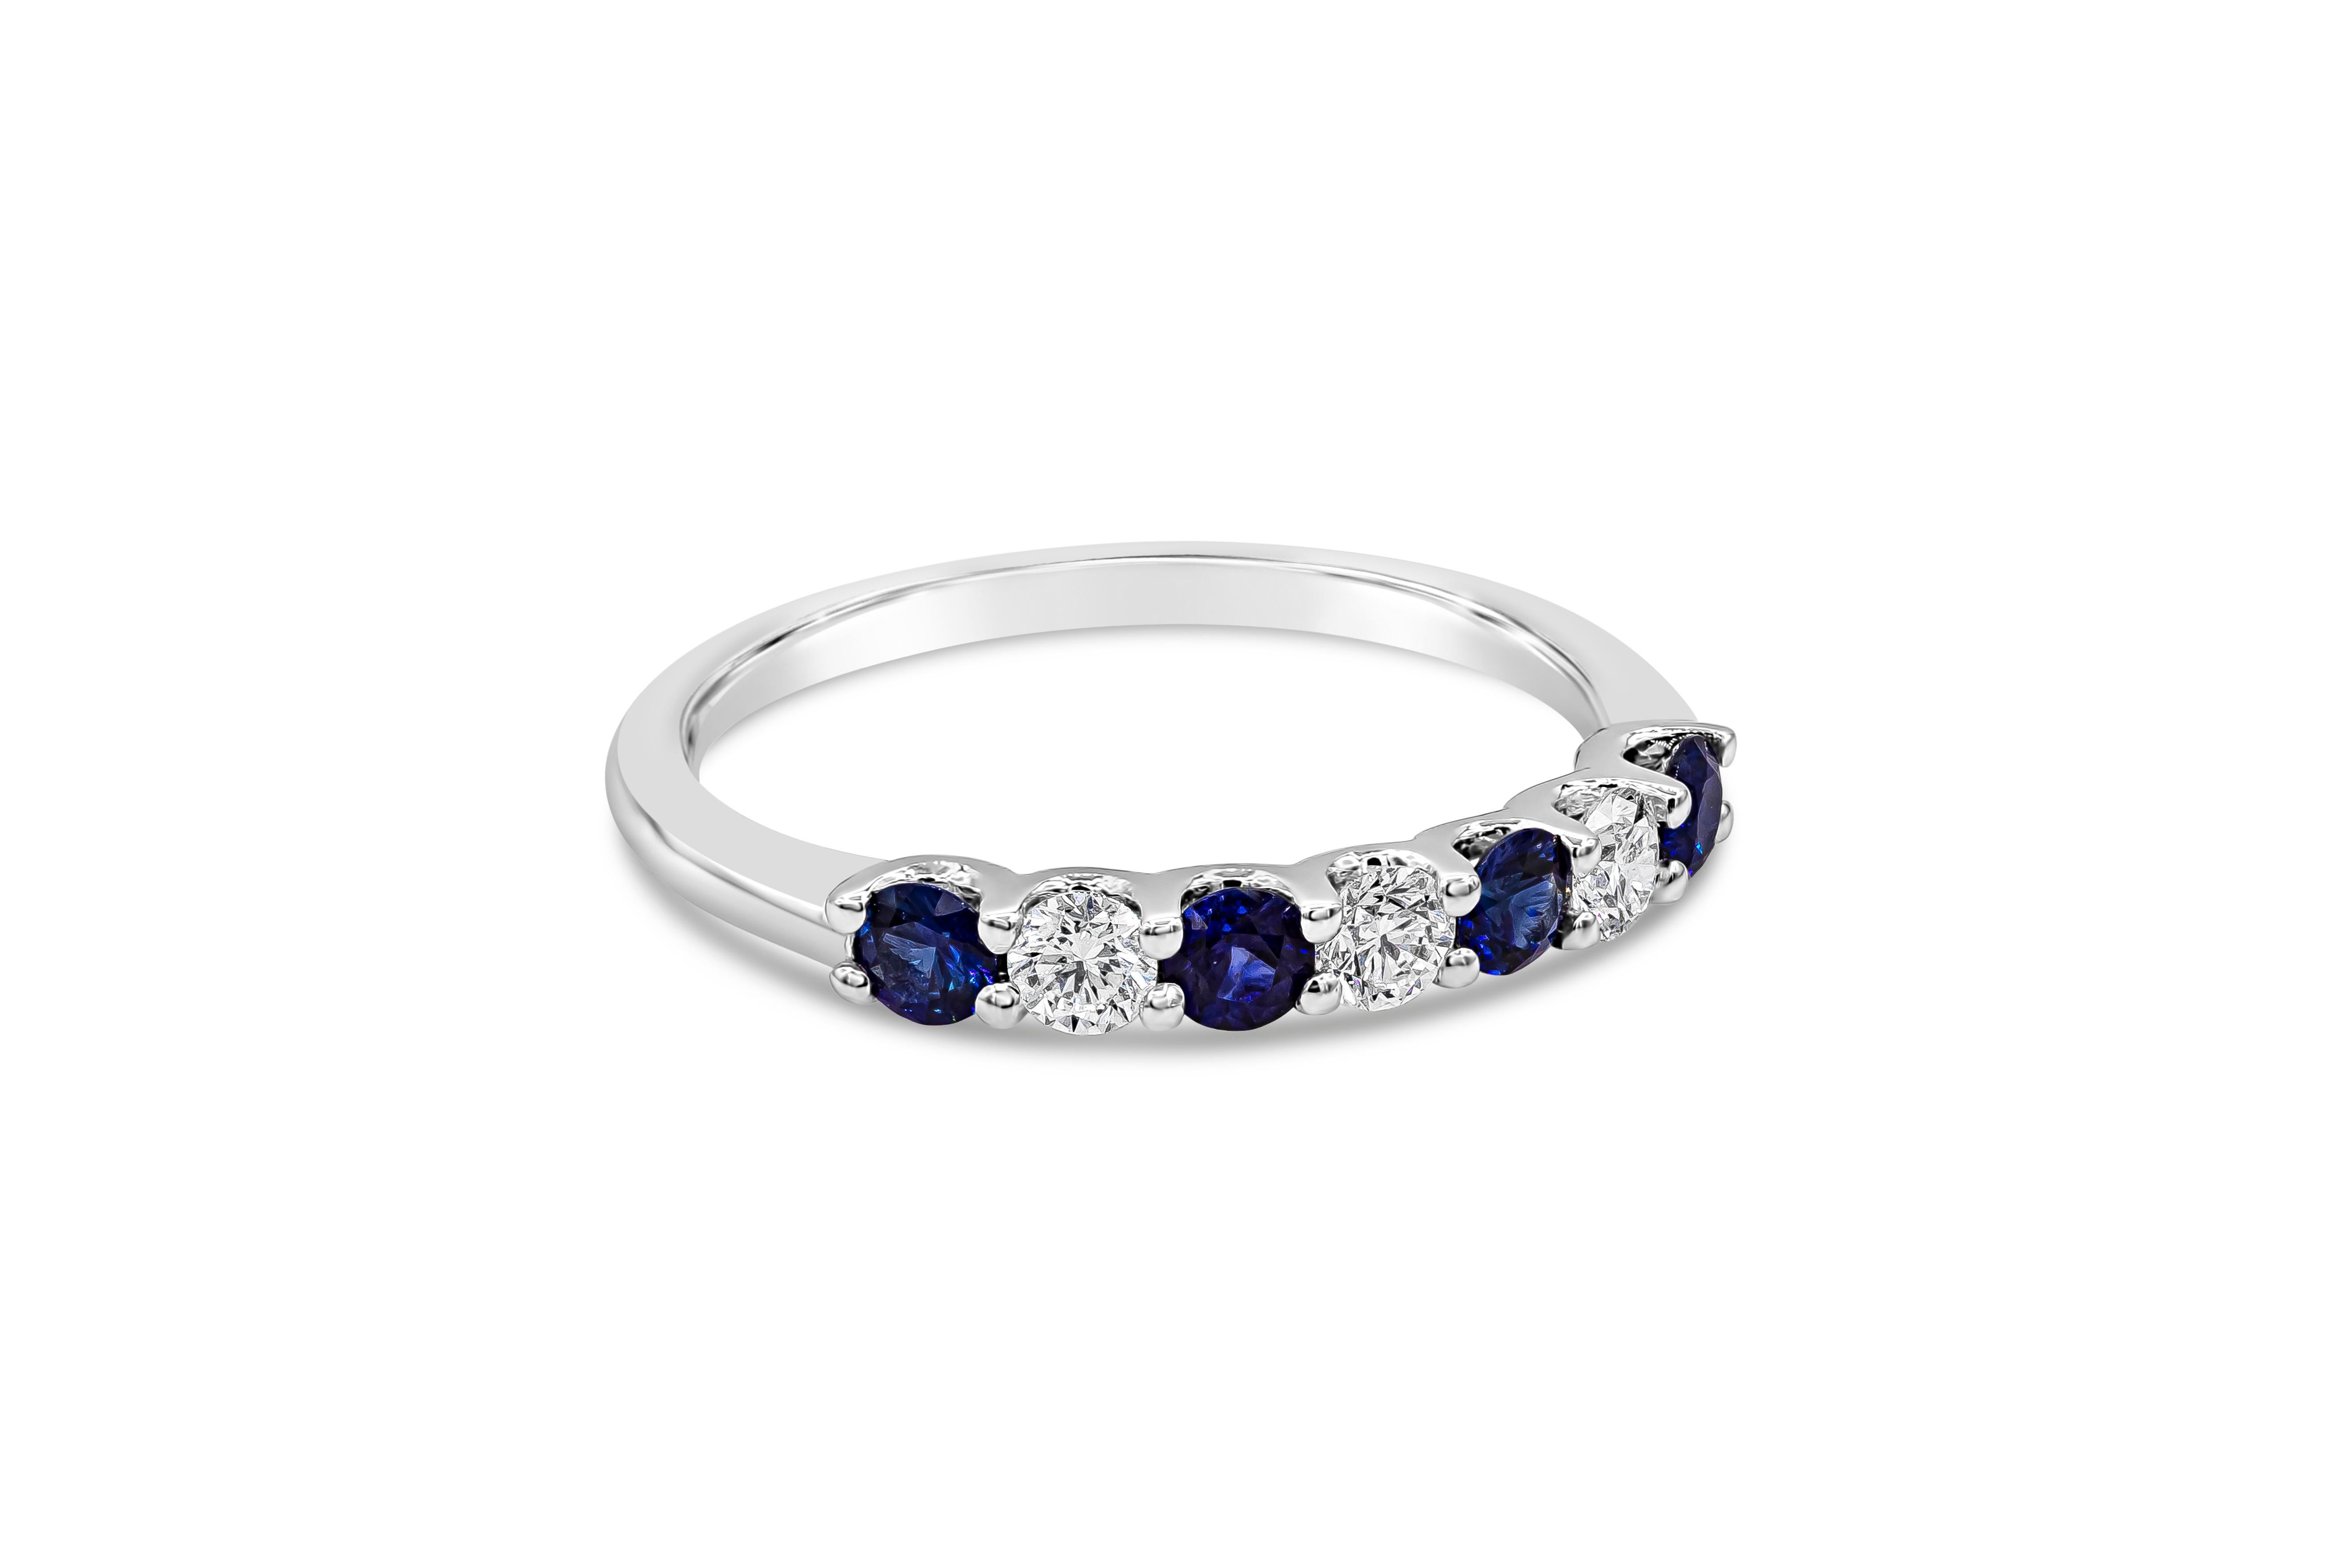 Features beautiful round cut blue sapphires alternating with round brilliant diamonds. Set in 18k white gold. Blue sapphires weigh 0.41 carats; diamonds weigh 0.27 carats total. Size 6.5 US.

Style available in different price ranges. Prices are